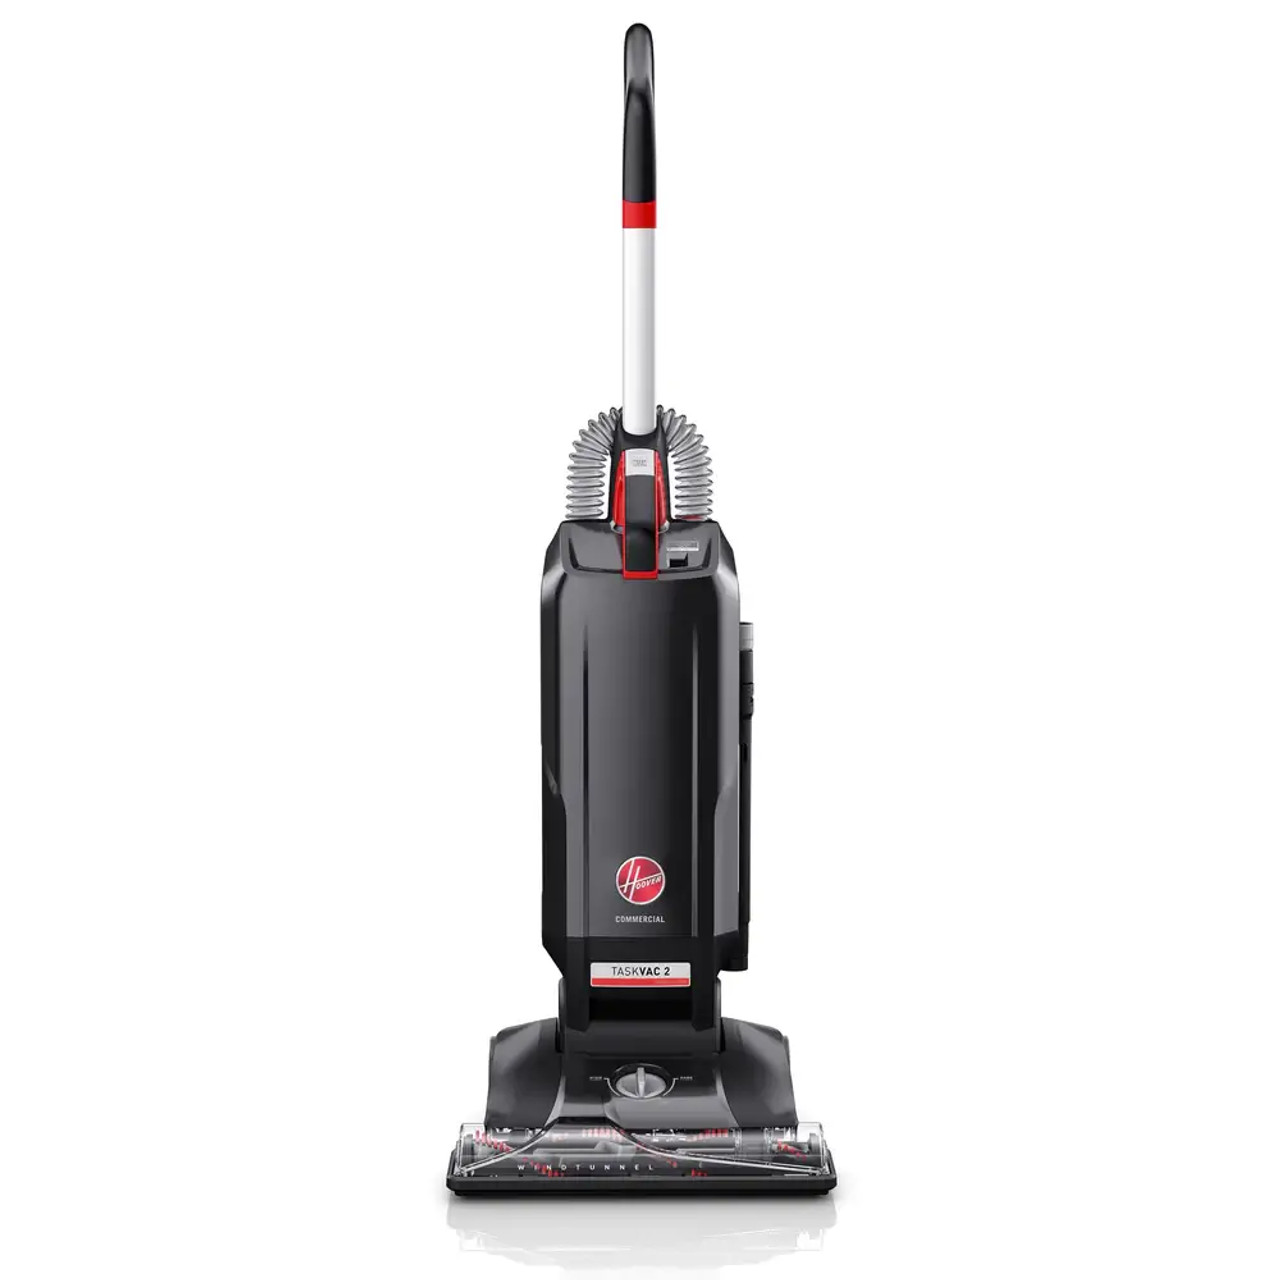 hoover Hoover 14" Task Vac 2 Commercial Bagged Upright Vacuum Cleaner with HEPA Filtration - Professional Cleaning with Advanced Filtration